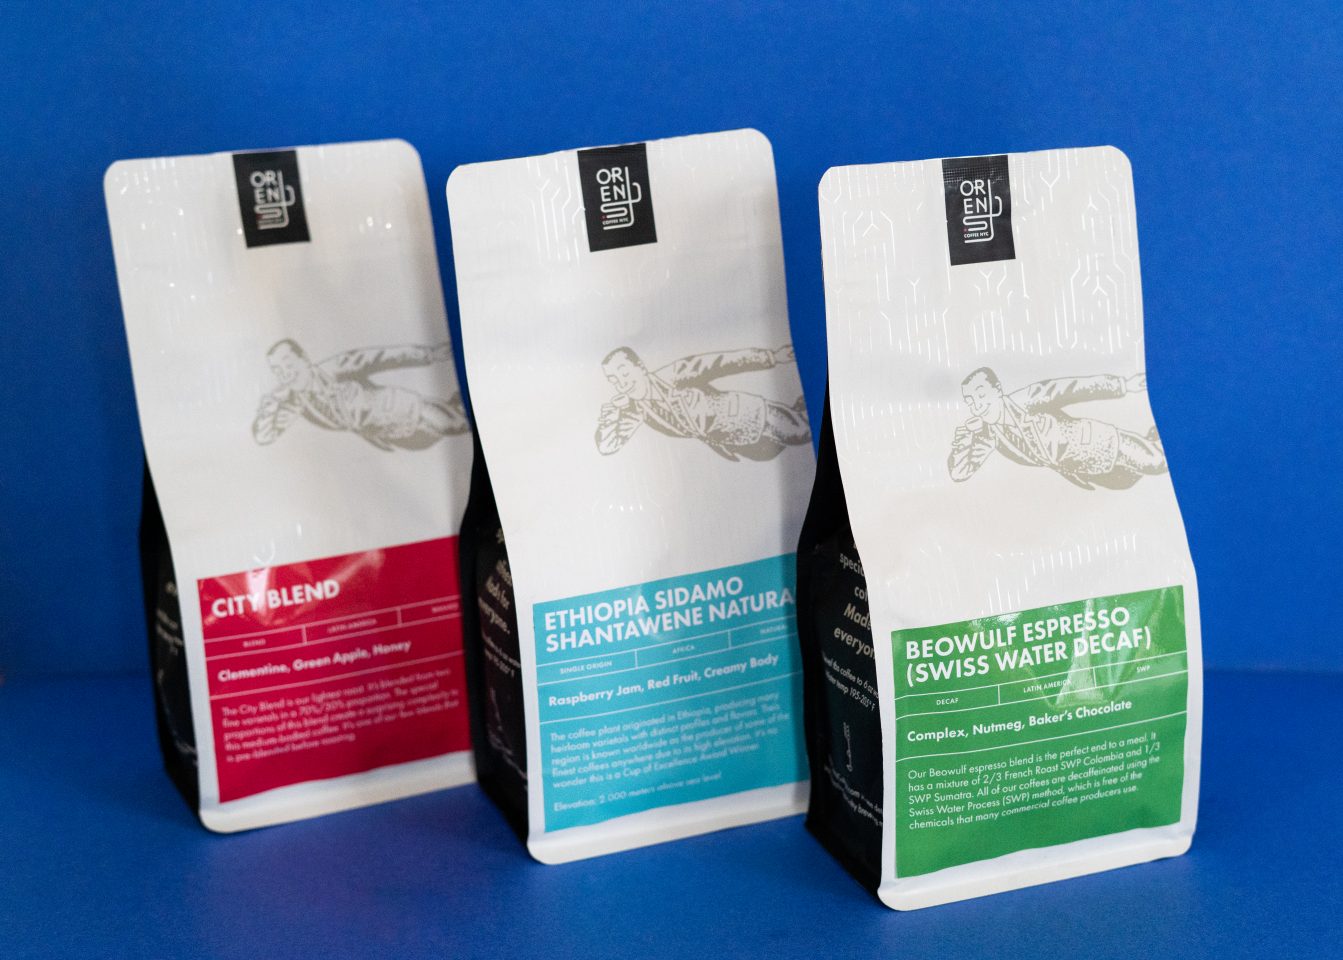 A trio of coffee bags from Orens